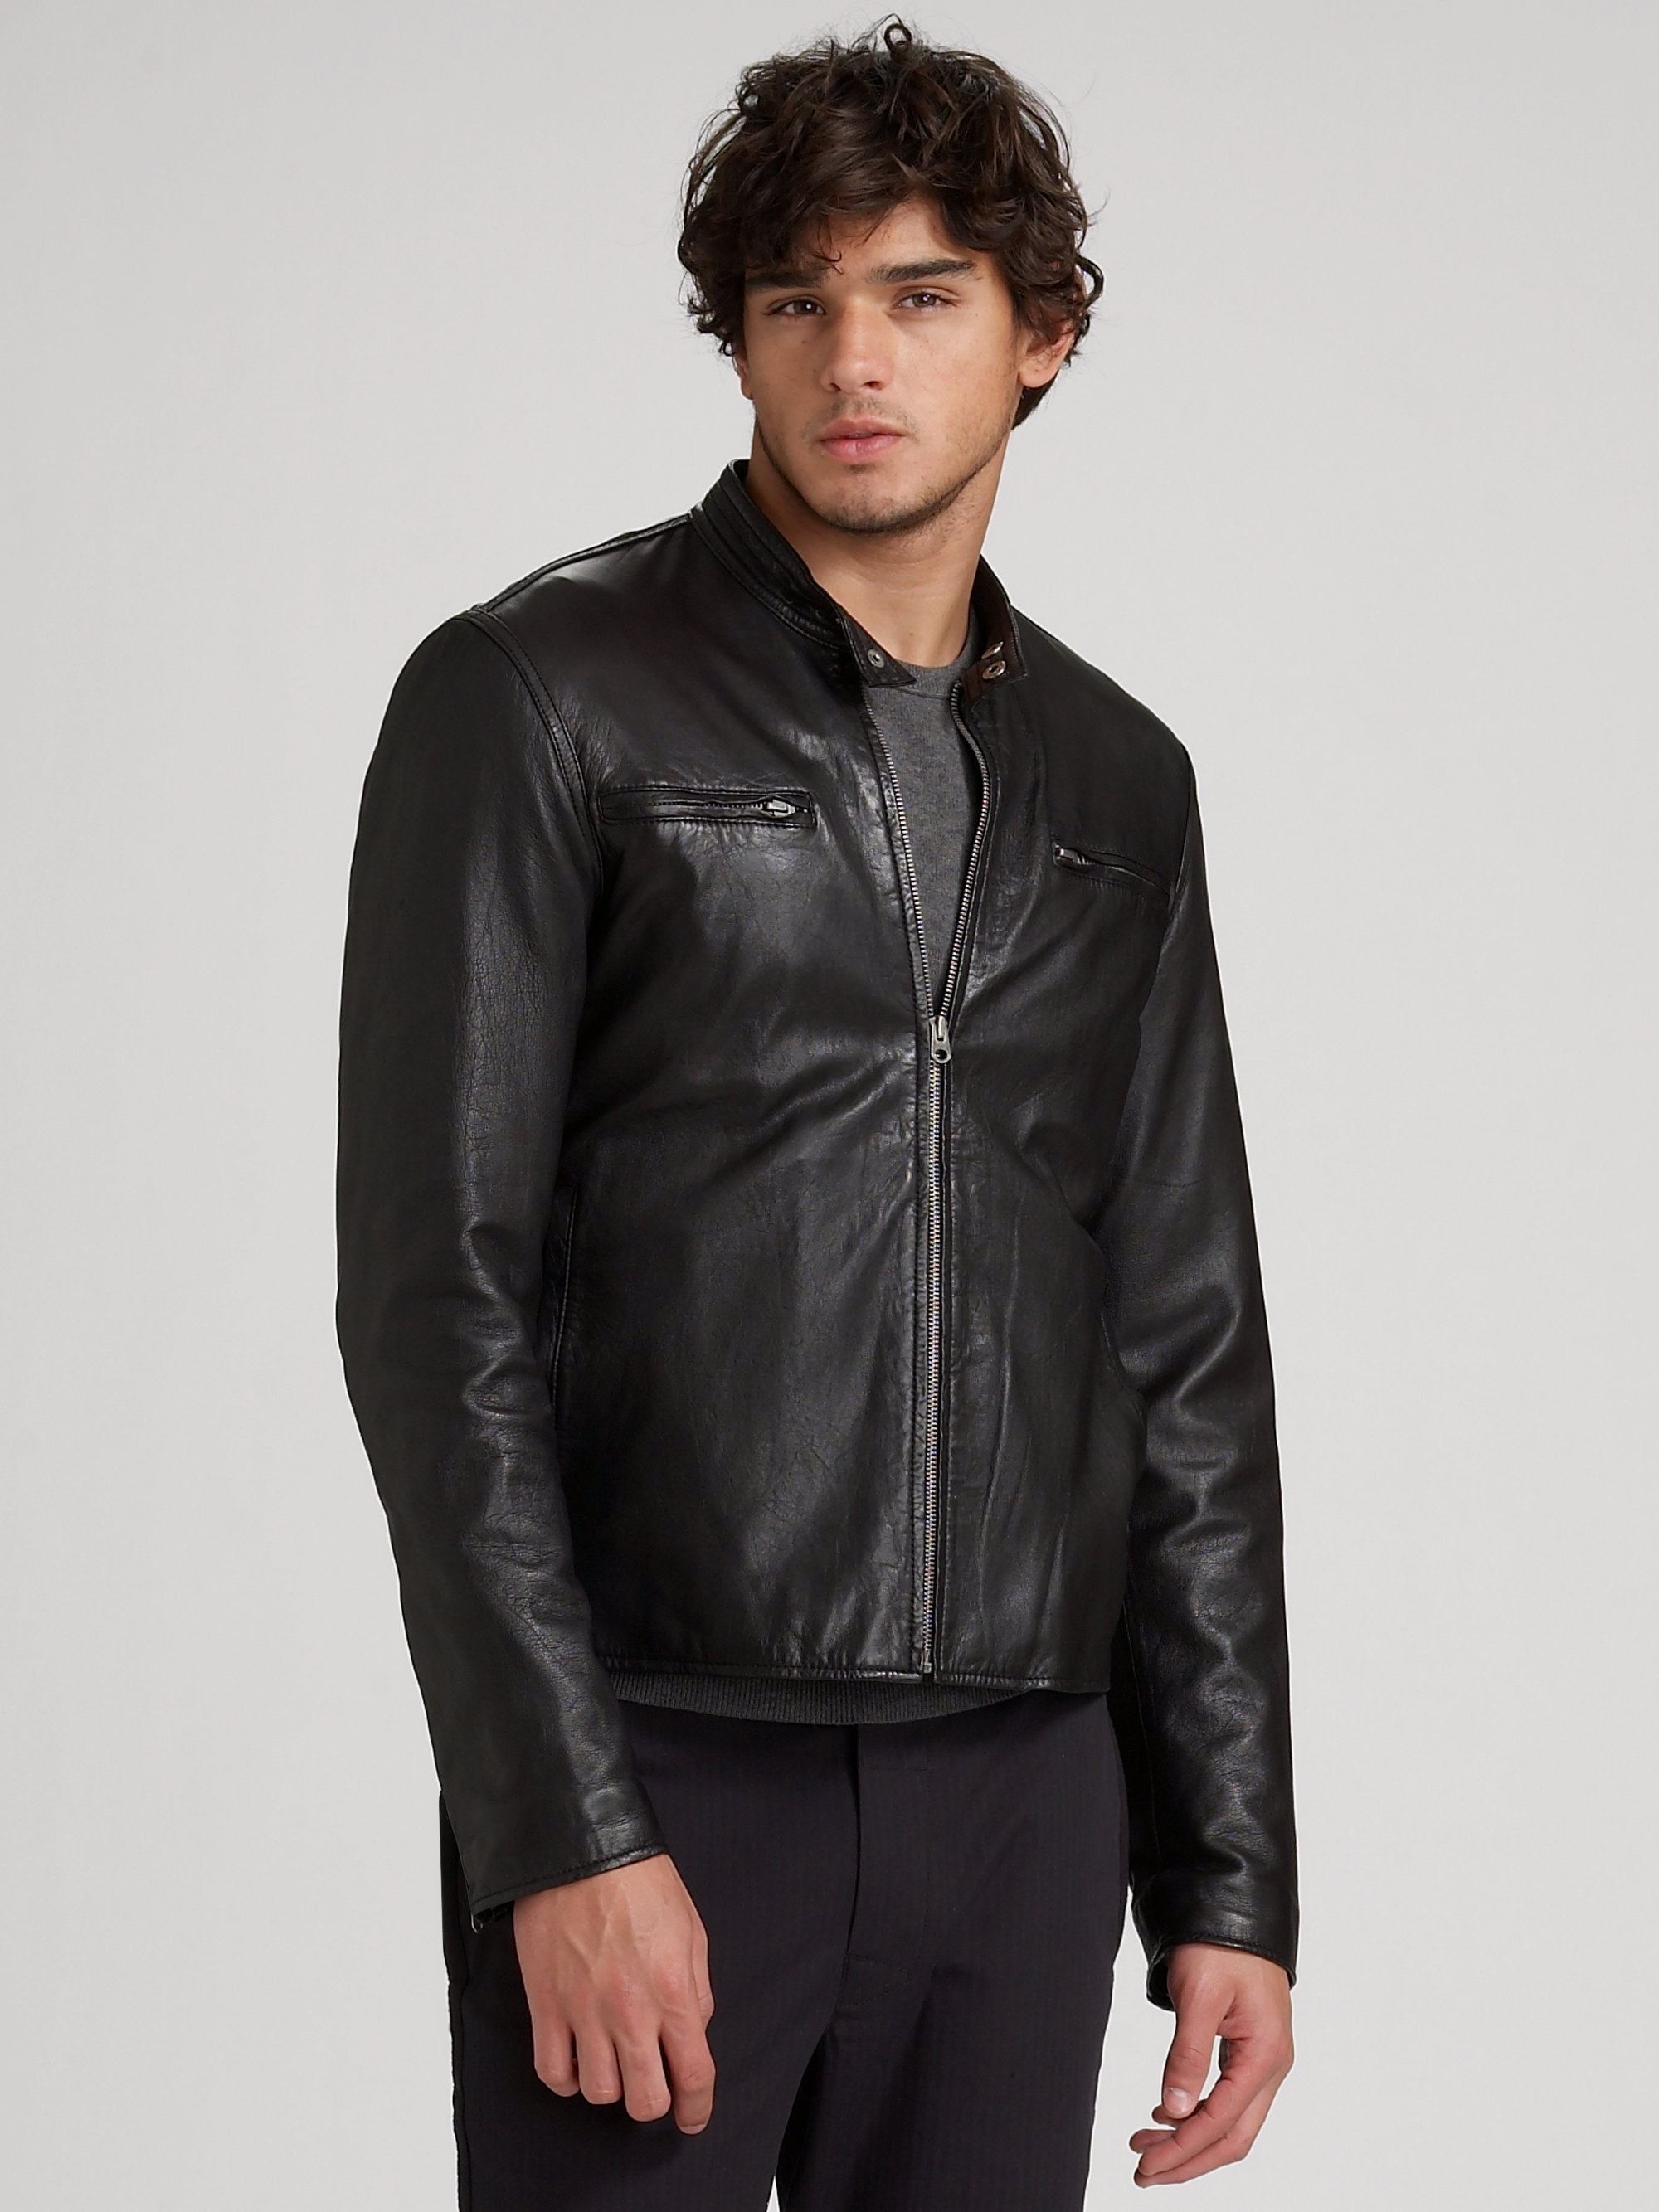 Lyst - Converse Leather Bomber Jacket in Black for Men